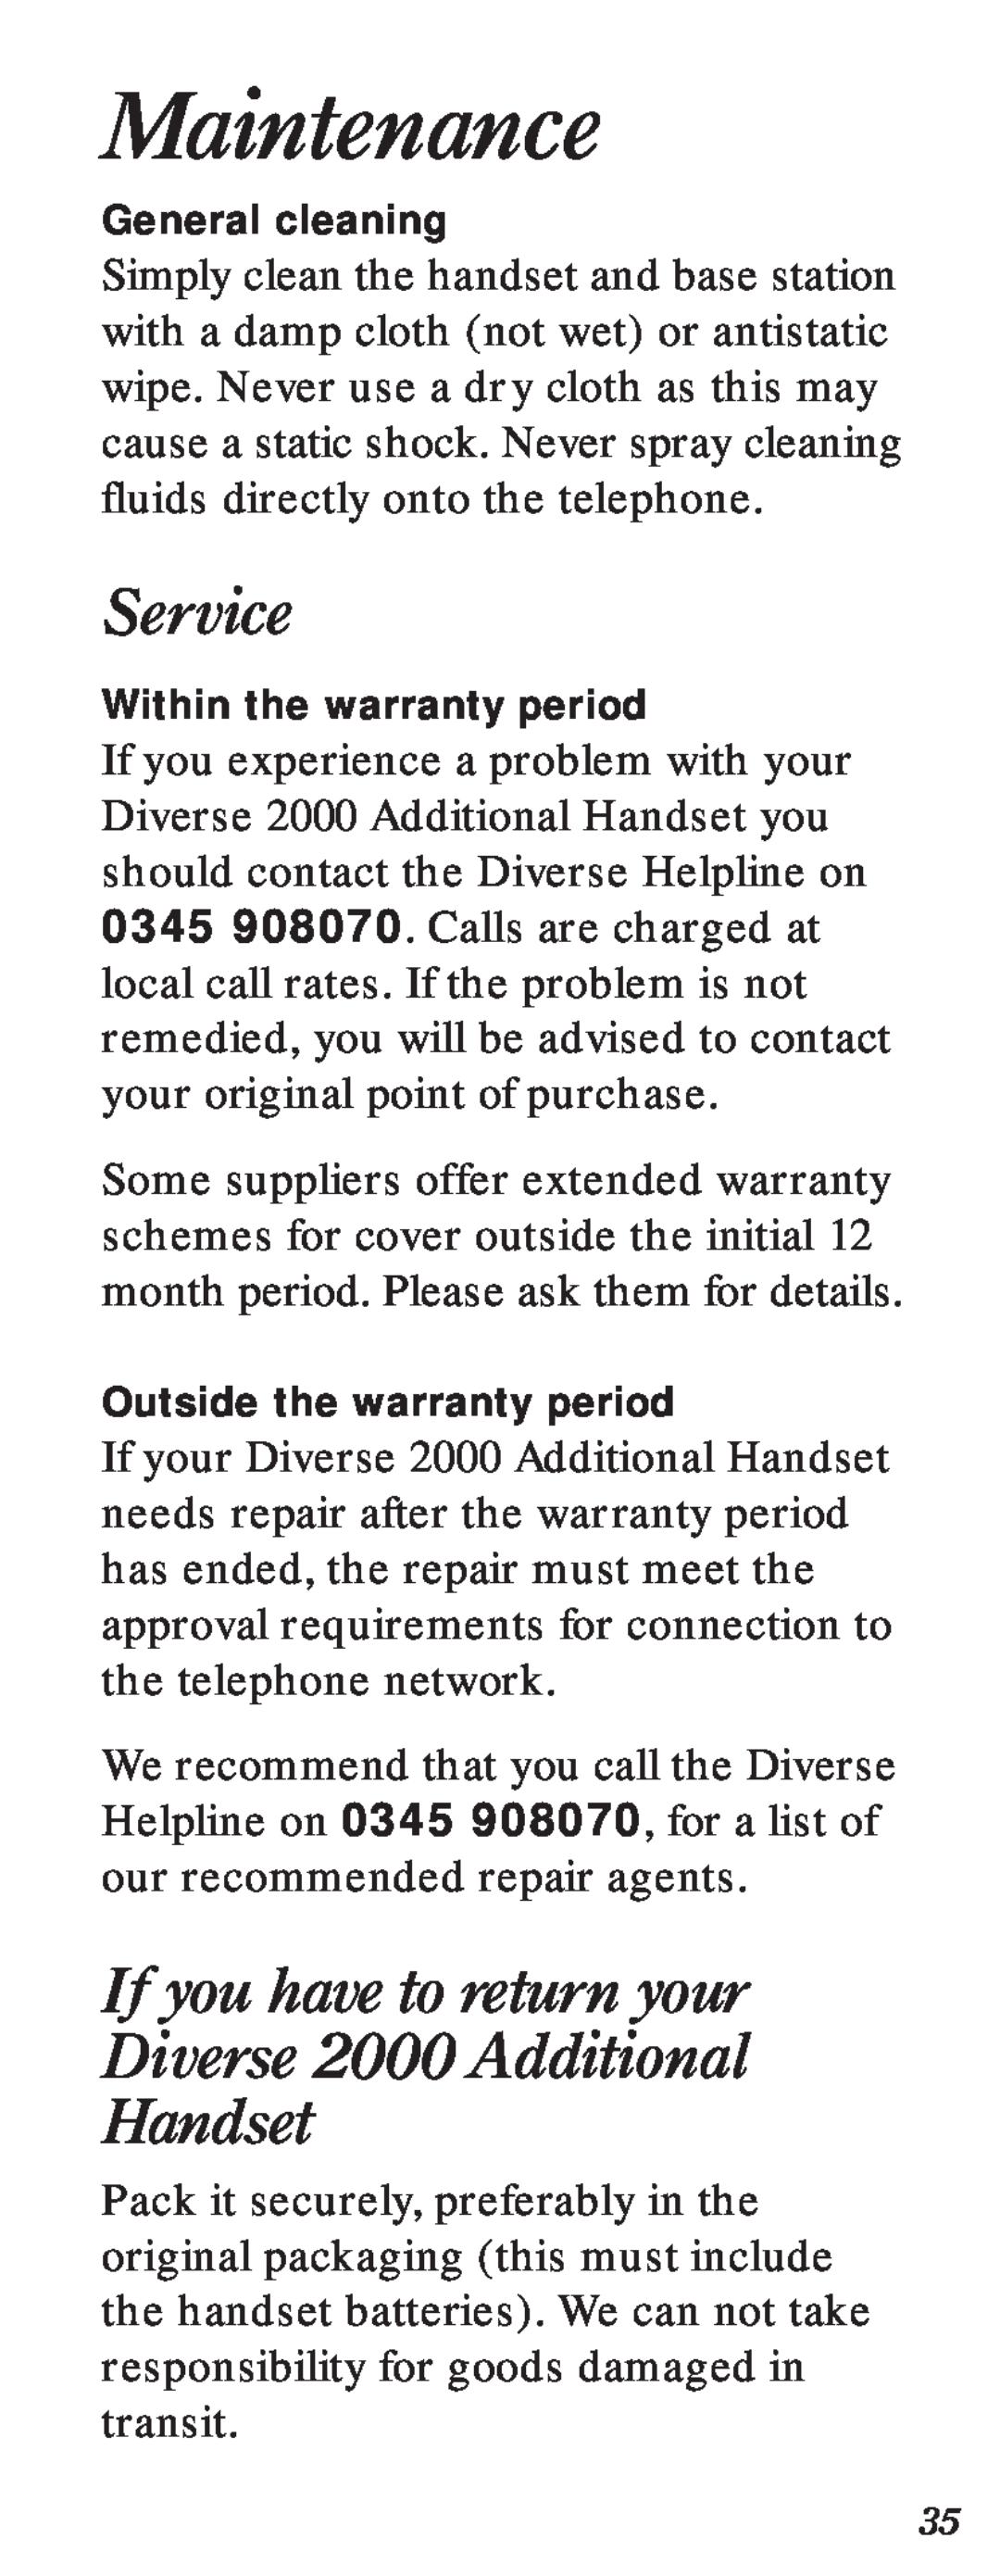 BT user manual Maintenance, Service, If you have to return your Diverse 2000 Additional Handset 